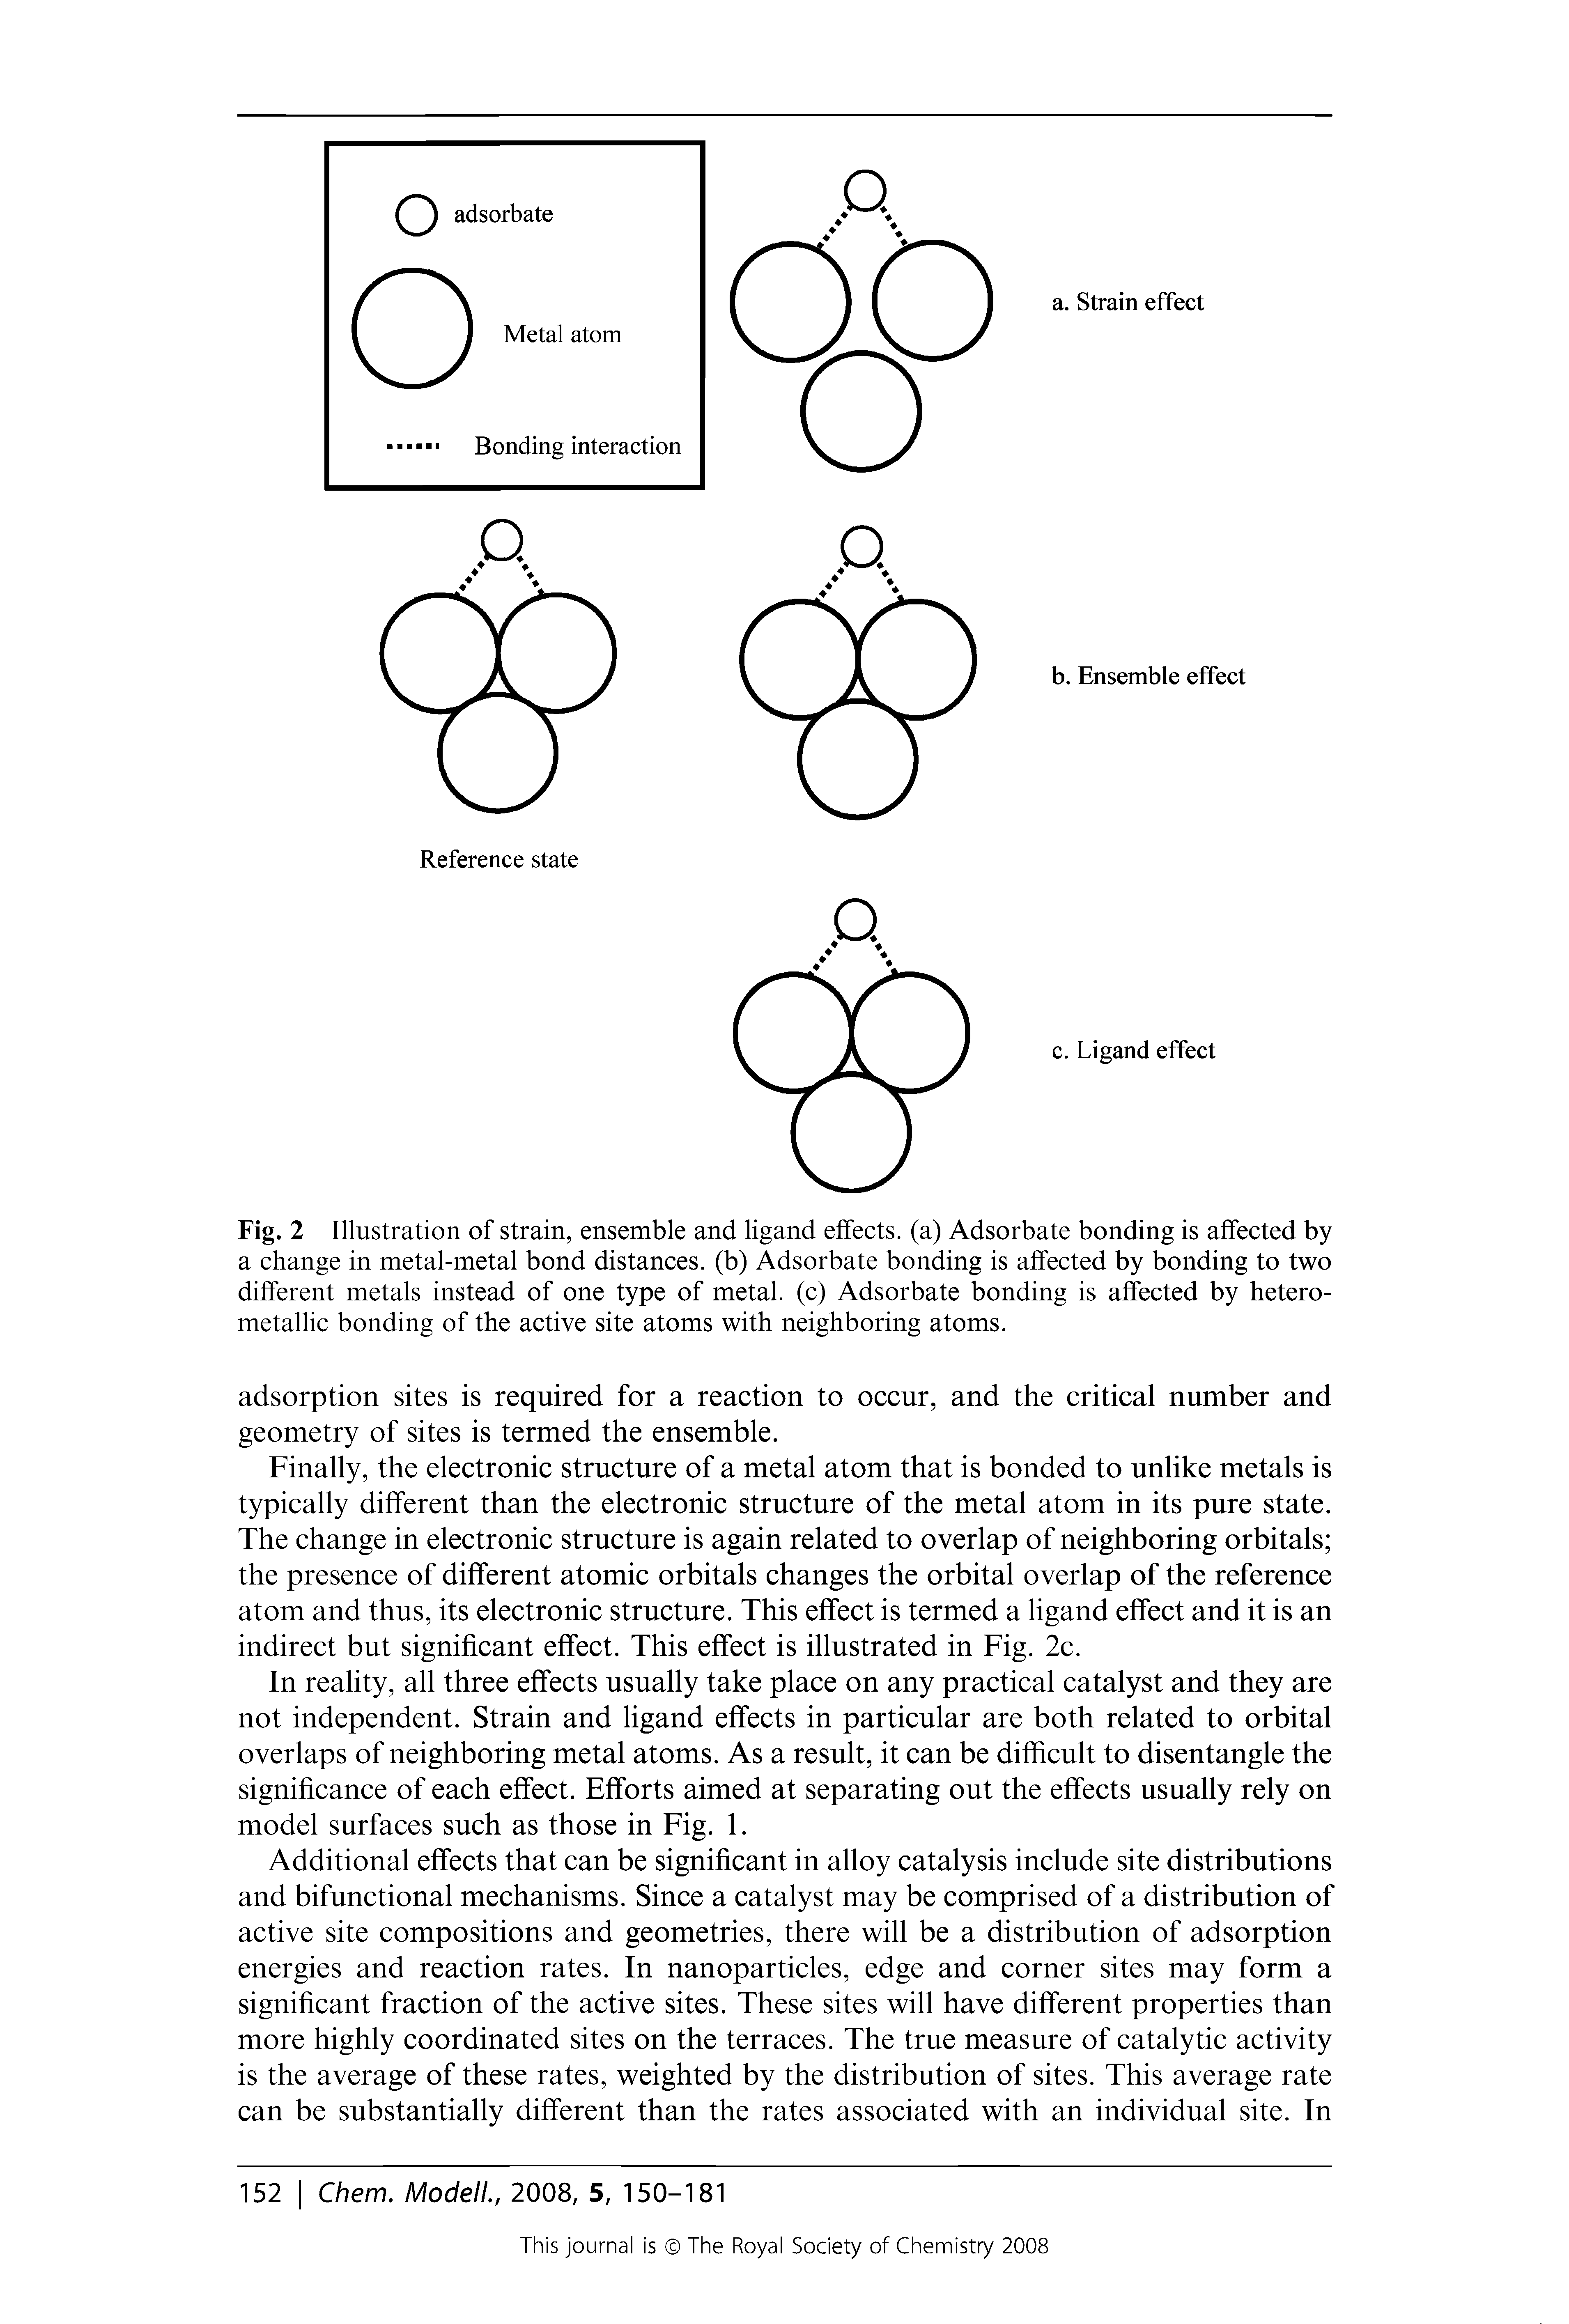 Fig. 2 Illustration of strain, ensemble and ligand effects, (a) Adsorbate bonding is affected by a change in metal-metal bond distances, (b) Adsorbate bonding is affected by bonding to two different metals instead of one type of metal, (c) Adsorbate bonding is affected by hetero-metallic bonding of the active site atoms with neighboring atoms.